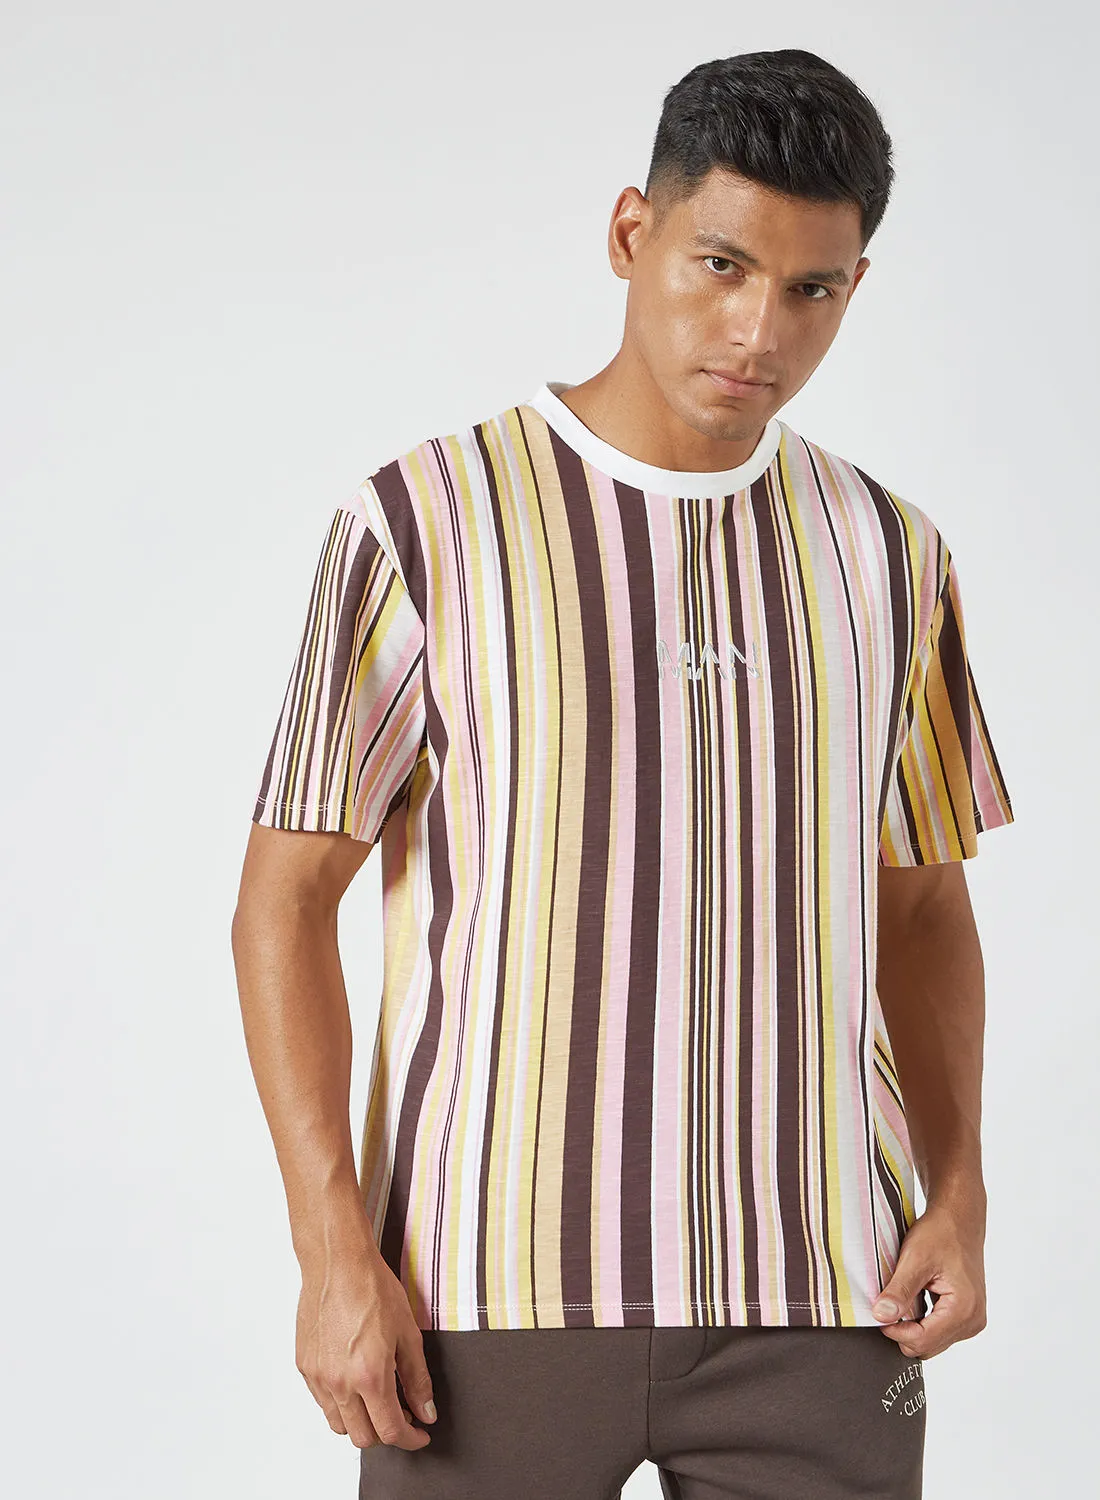 STATE 8 Short Sleeve Striped T-Shirt Brown